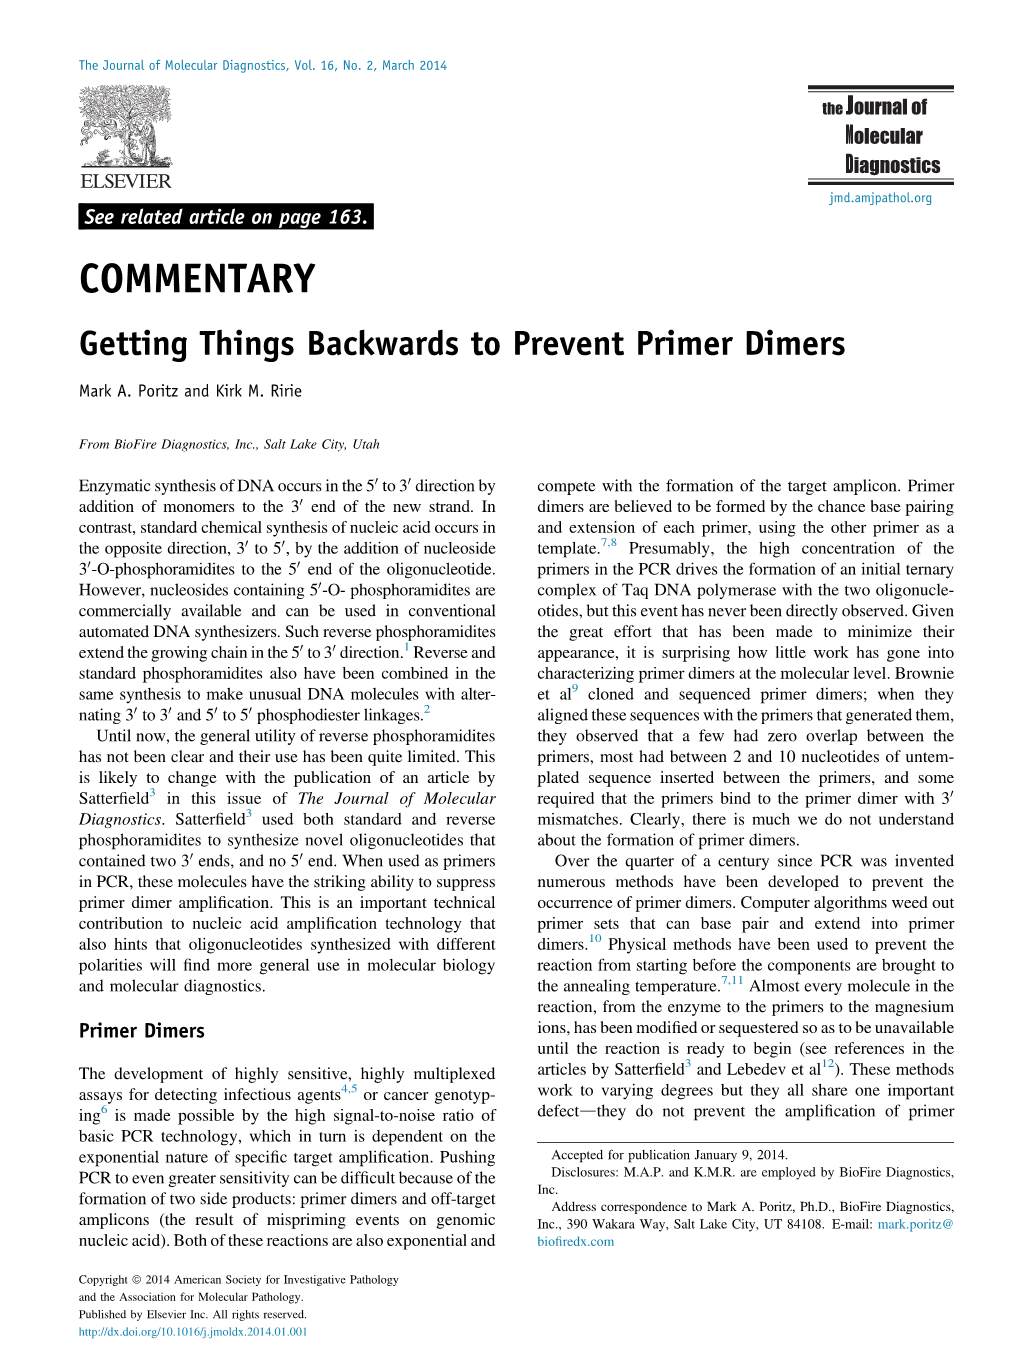 Getting Things Backwards to Prevent Primer Dimers